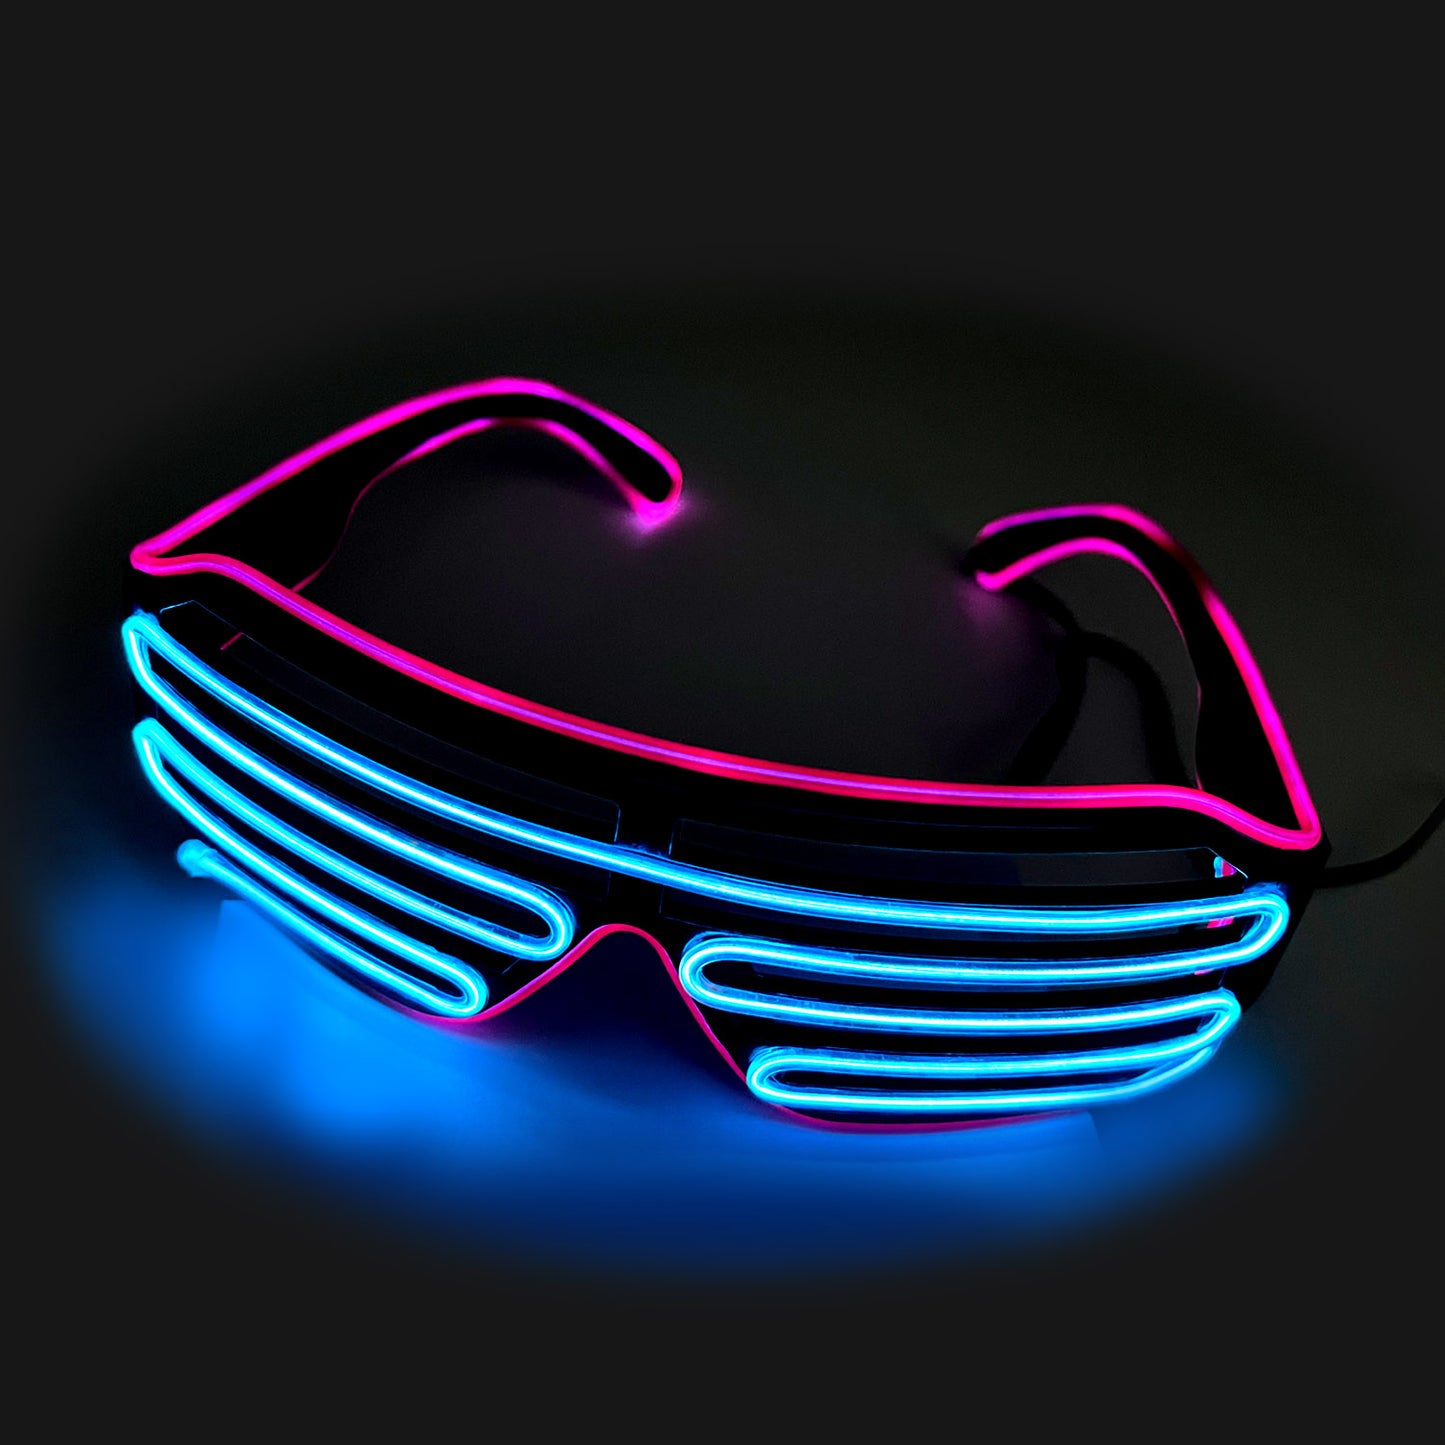 LED Blinds Glasses For Bar Club Party Music Festival Helloween